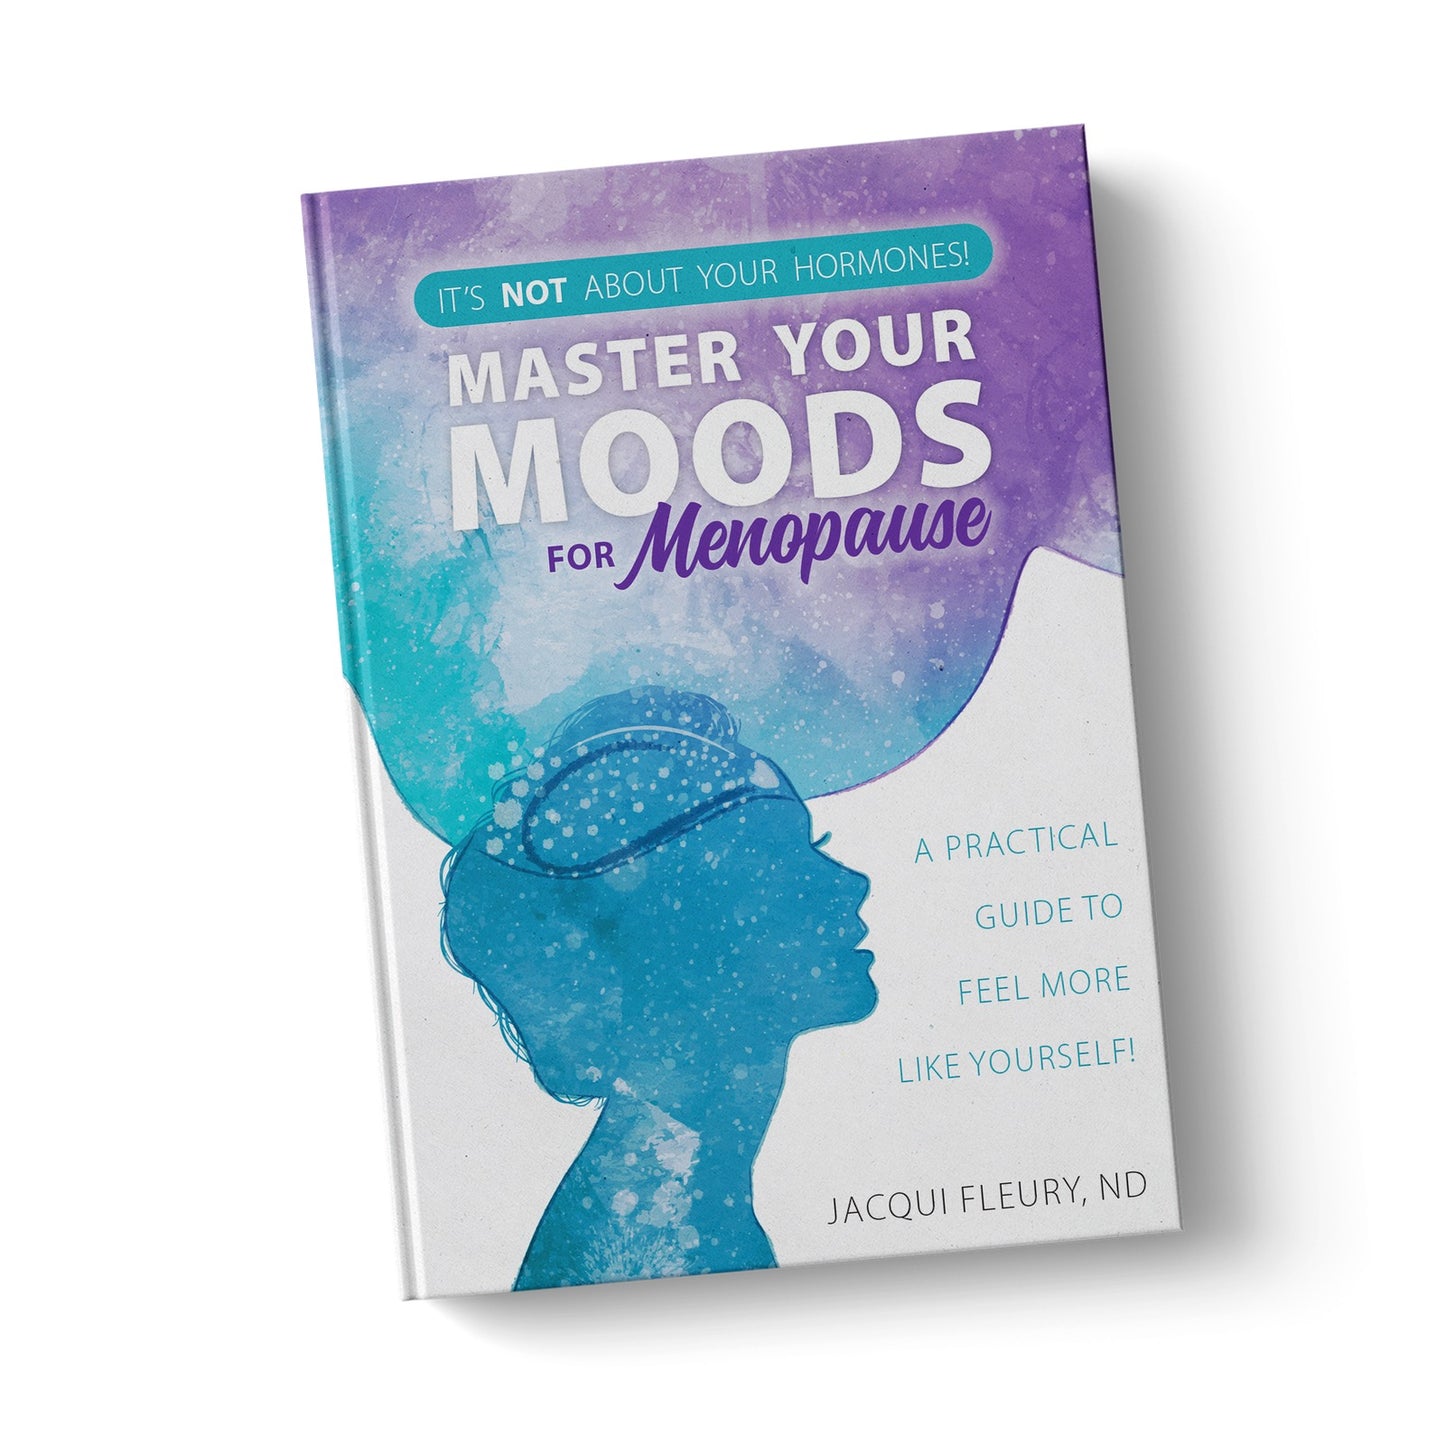 Master Your Moods for Menopause: A Practical Guide to Feel More Like Yourself